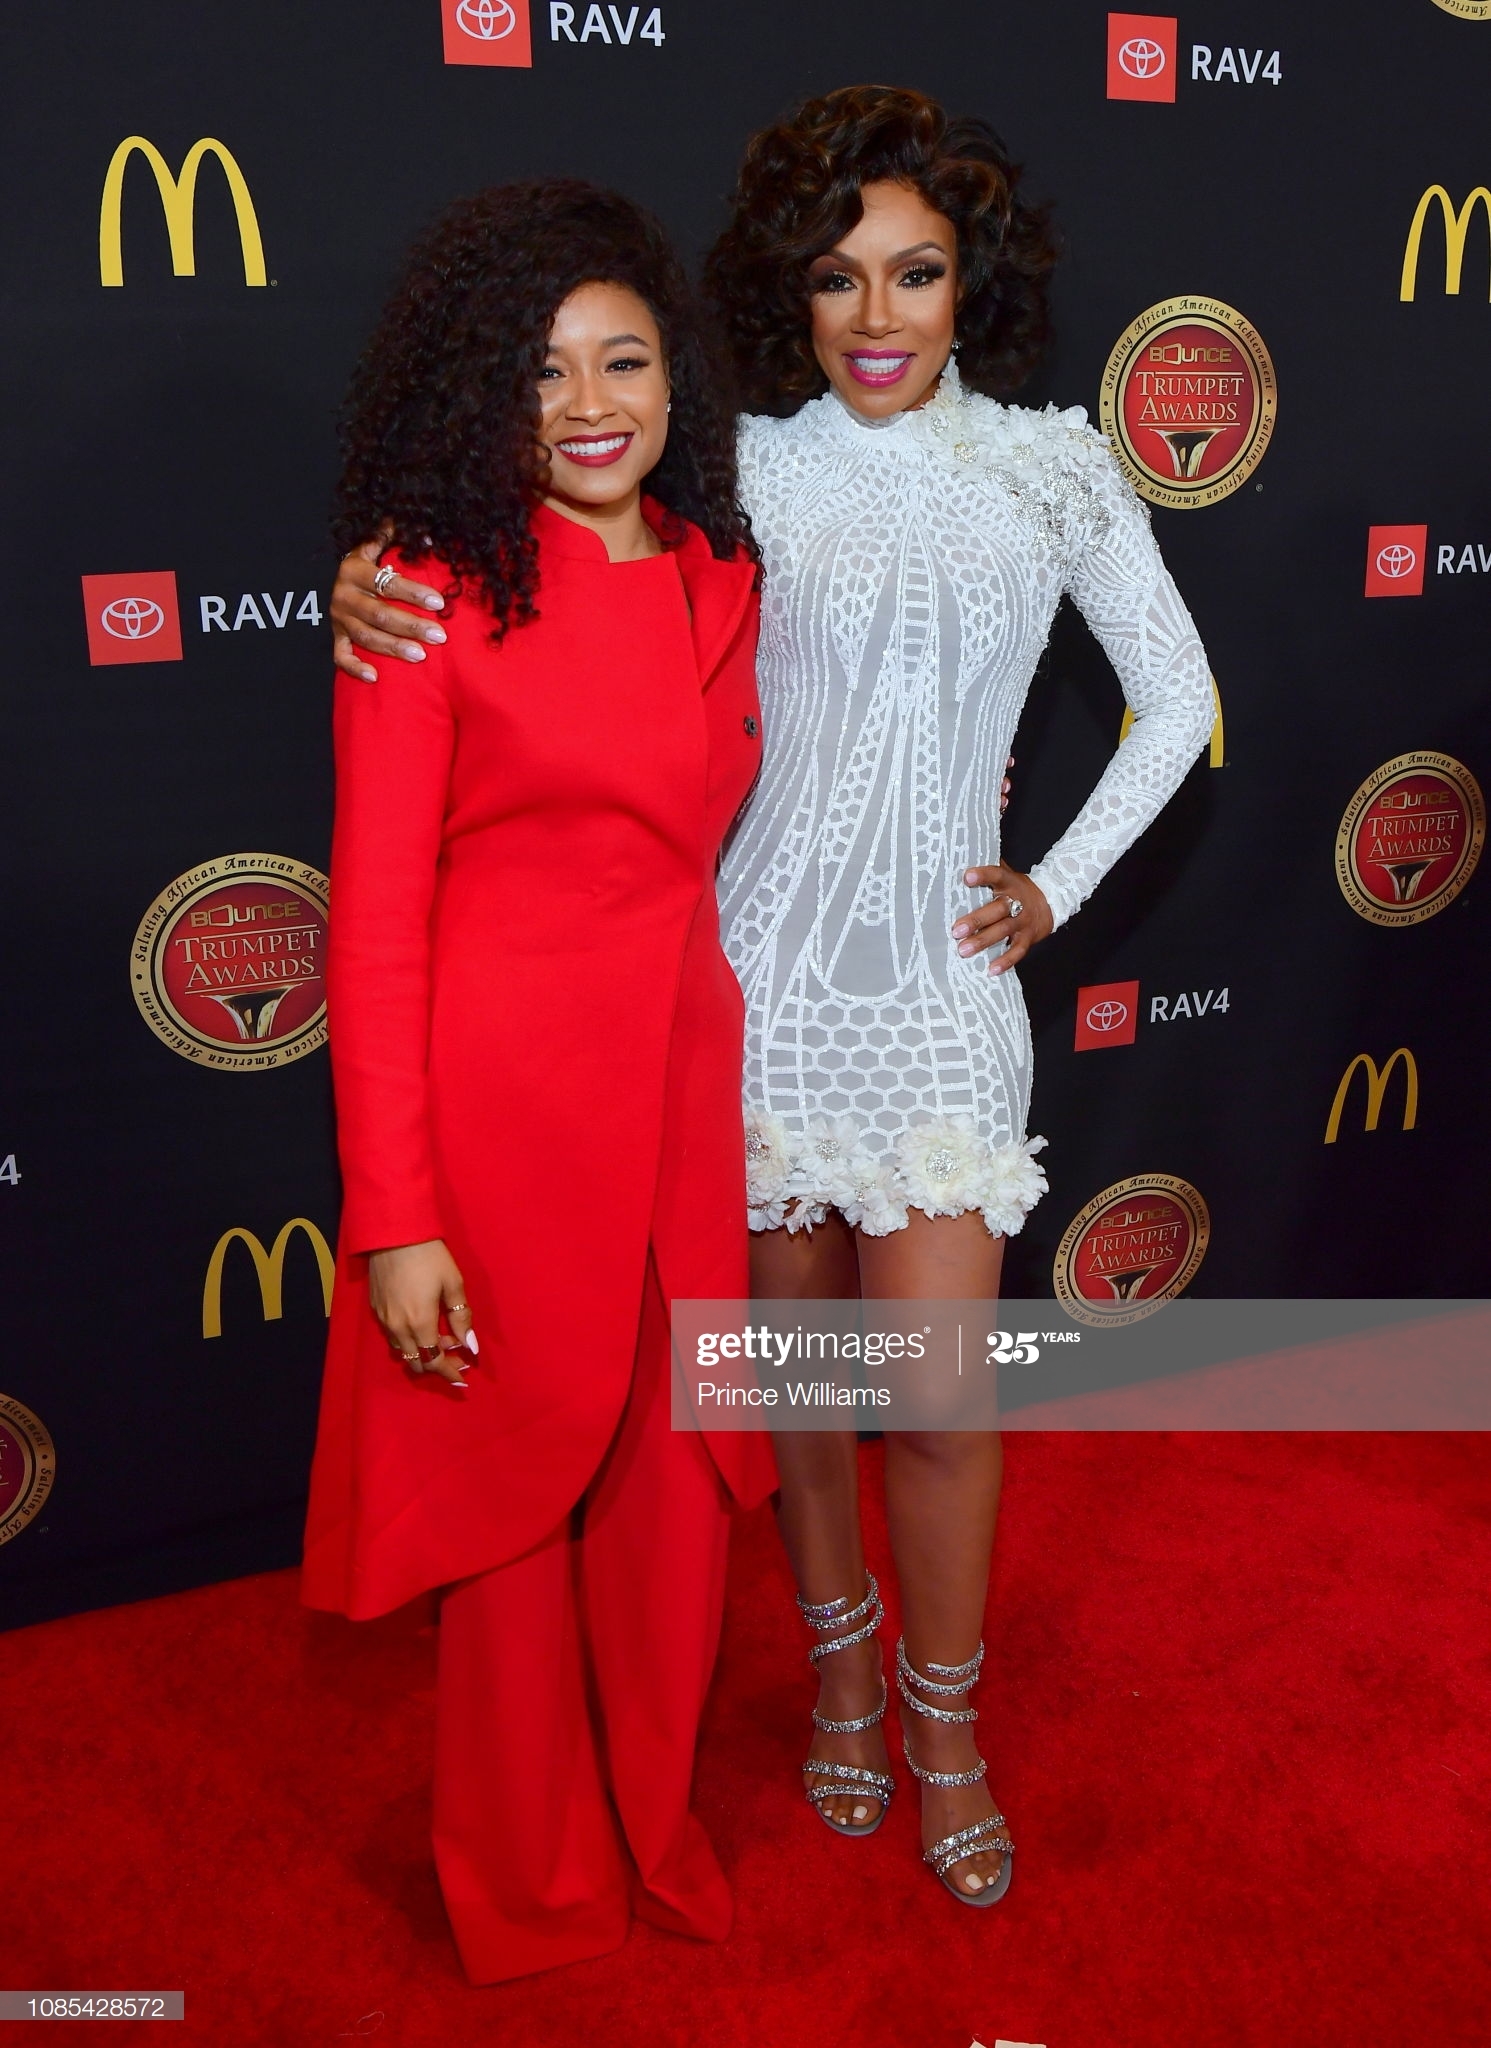 Pictures of wendy raquel robinson